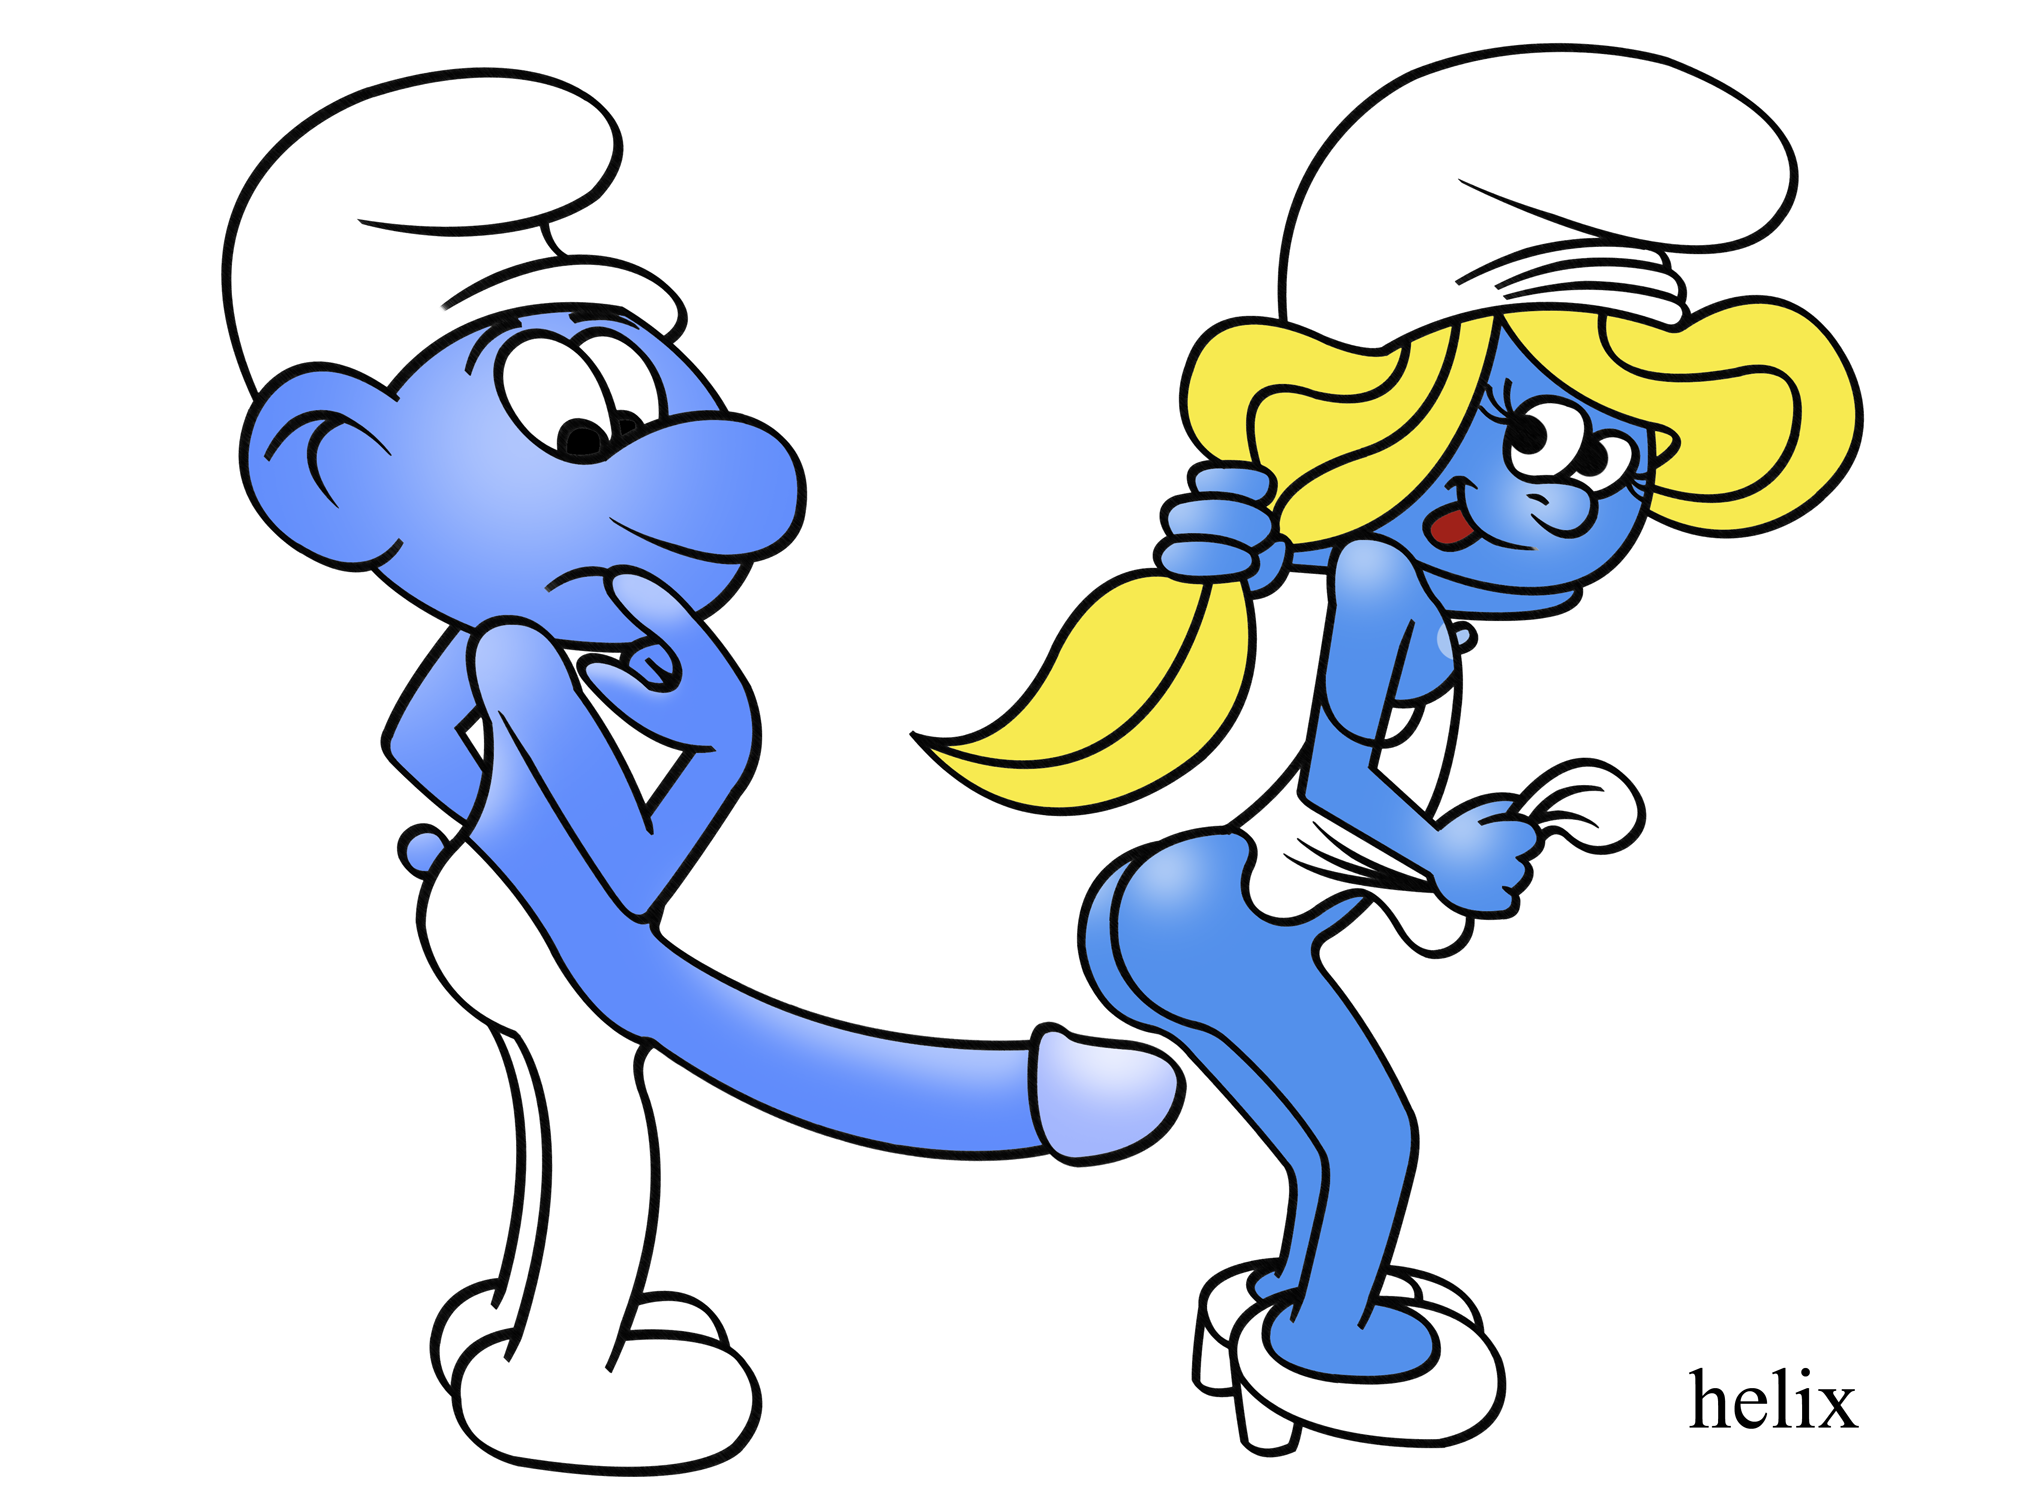 Papa smurf can i lick your ass.